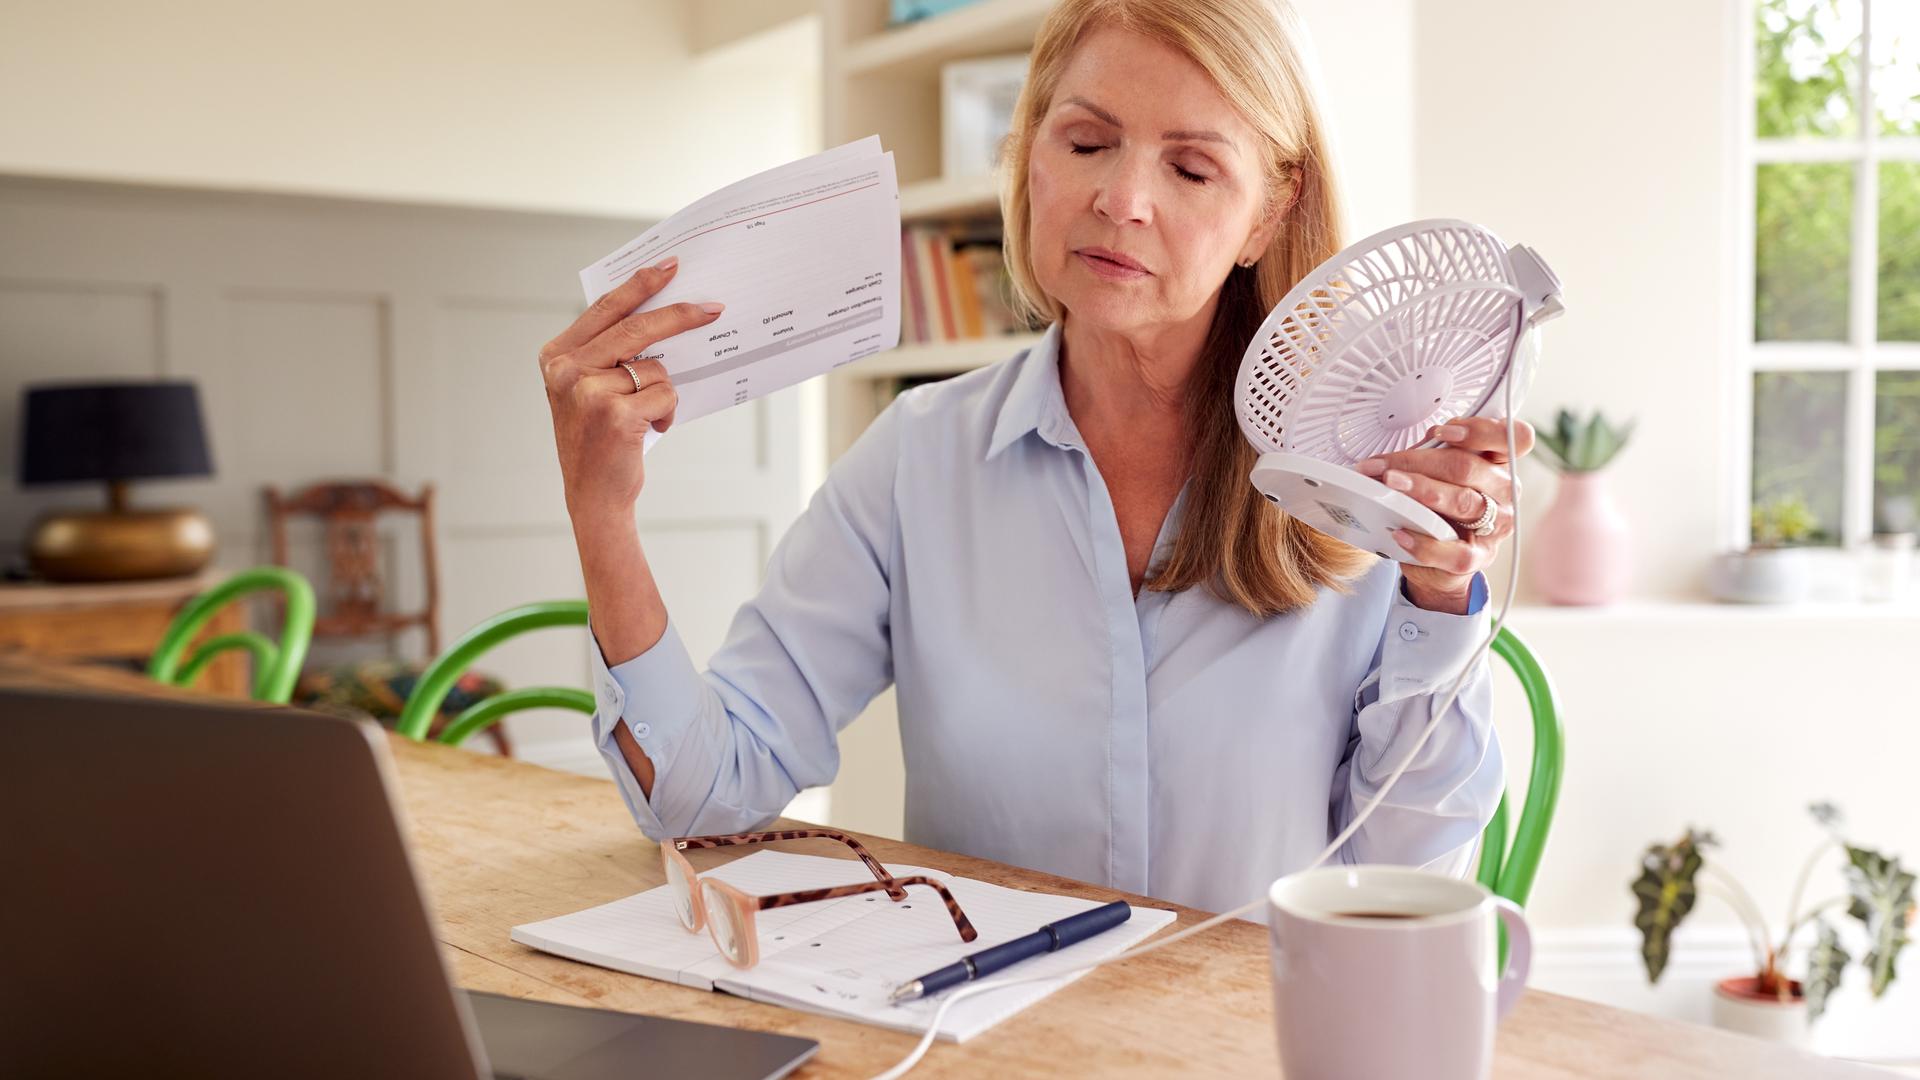 Hormone Replacement Therapy is often prescribed to manage the side effects of menopause such as hot flushes